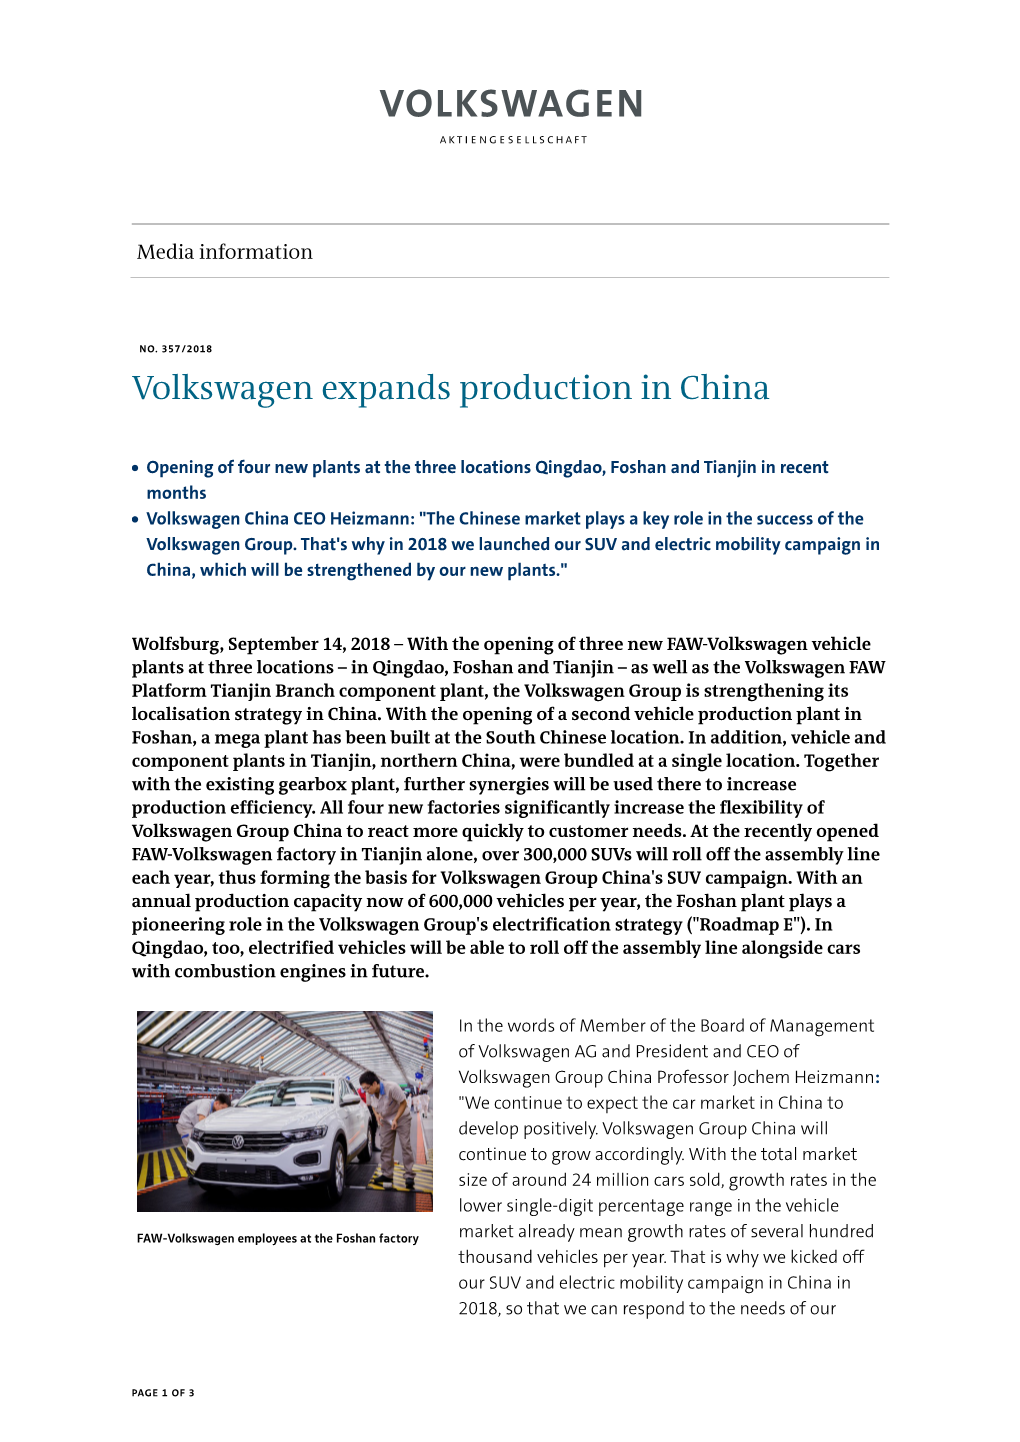 Volkswagen Expands Production in China